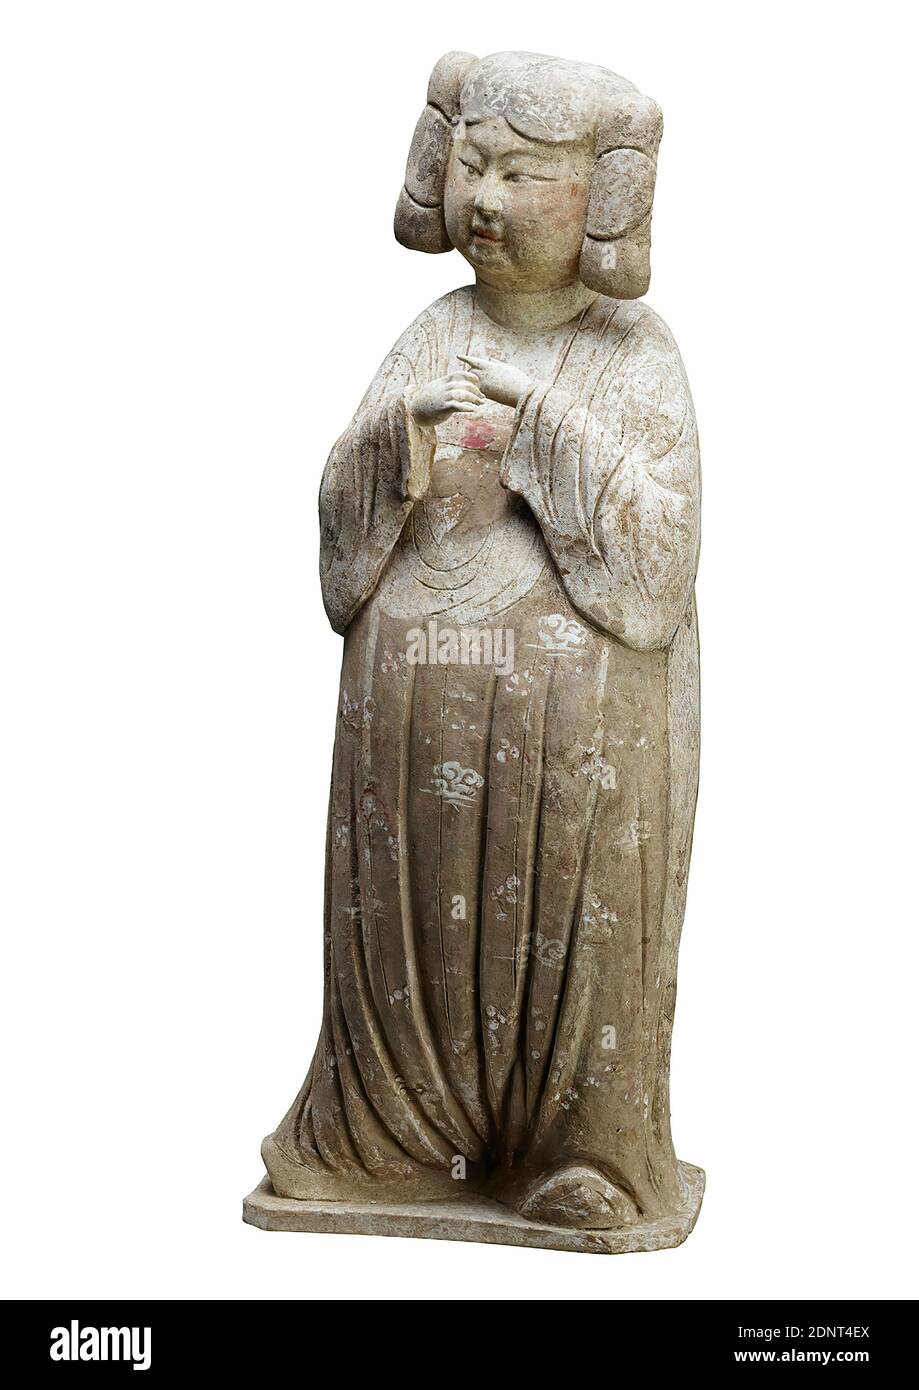 Grave figure of a court lady, Earthenware, painted (ceramic), Total: Height: 64.50 cm; Width: 25.00 cm; Height: 19.00 cm, Grave goods, Woman, Royal Court; Courtiers, entourage, Tang Dynasty, The two court ladies come from a grave of the 8th century. This period represents the peak of grave sculpture in China. According to Chinese belief, the spirit of the deceased lived on. Therefore, the grave furnishings had to ensure that he would be able to stay in the afterlife in a manner befitting his status. The two ladies embody the ideal of beauty of their time in their chubbiness. Stock Photo